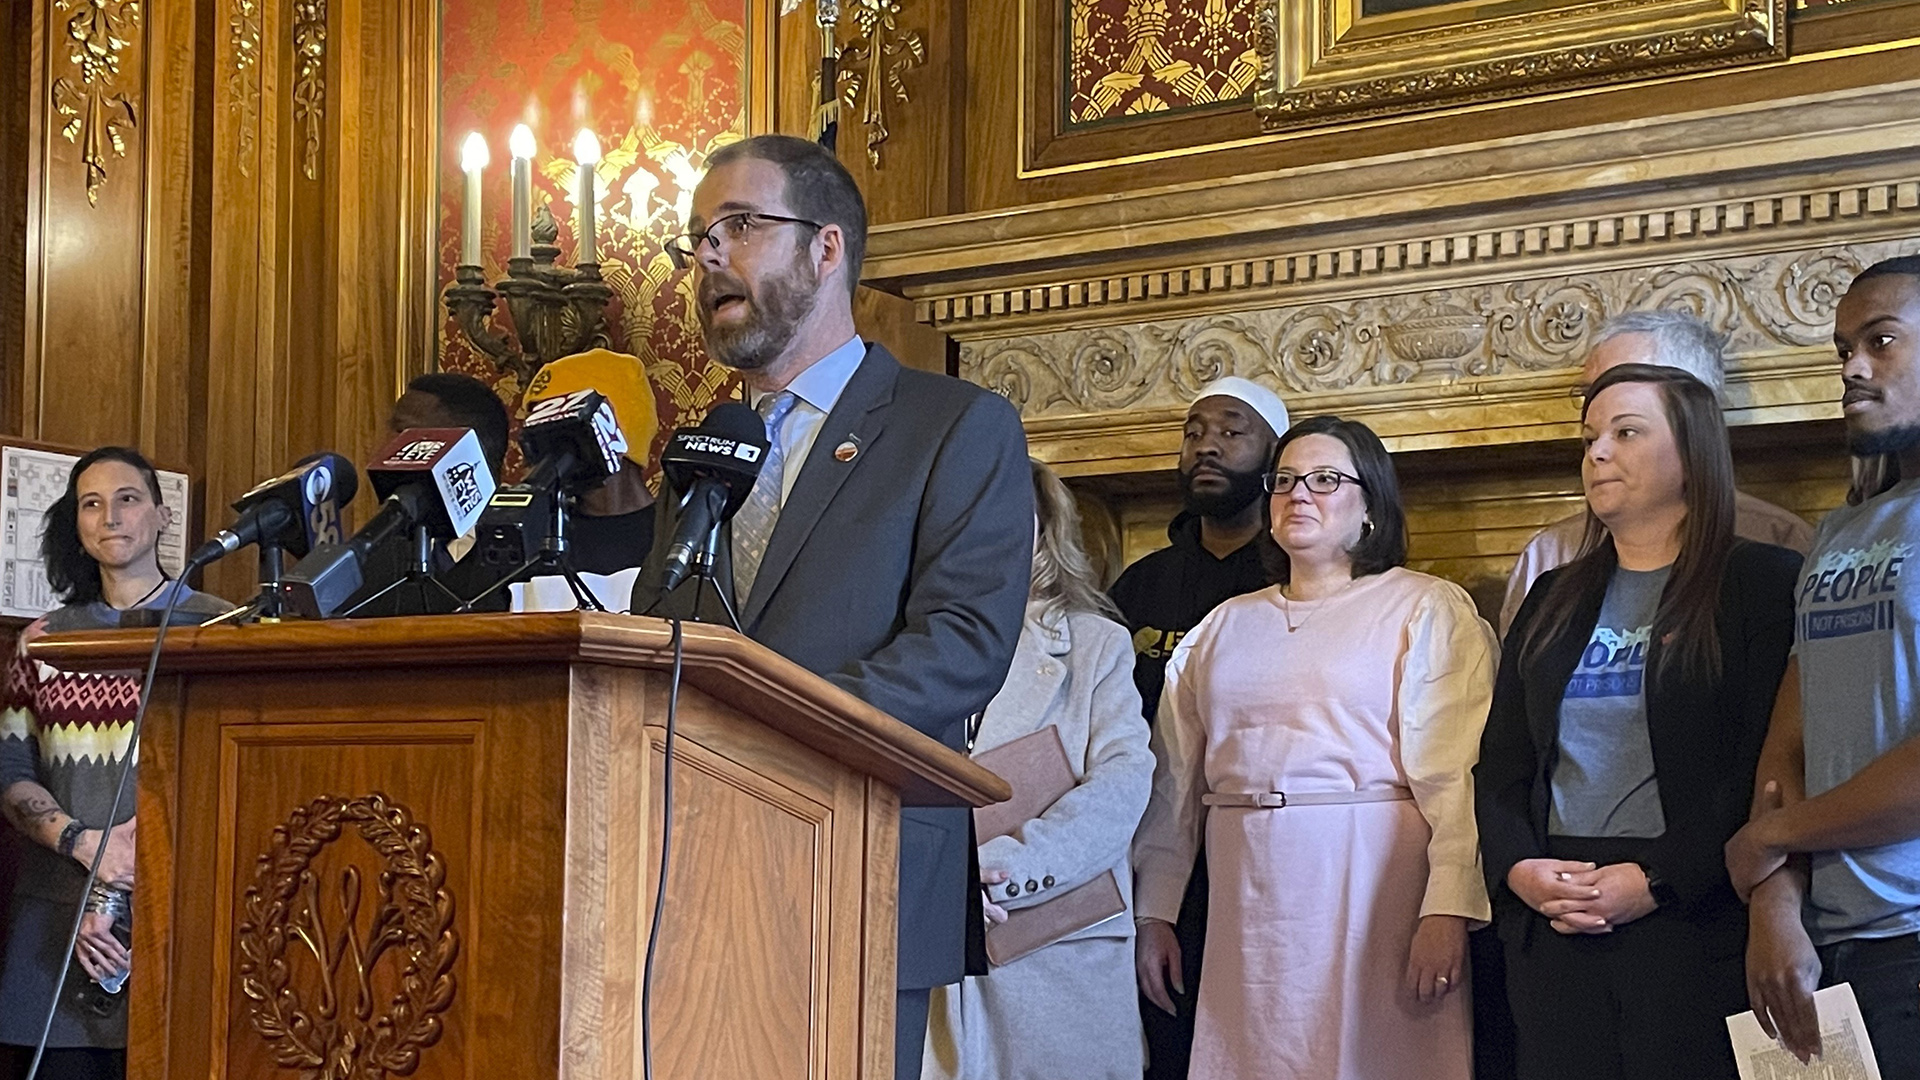 Ryan Clancy speaks while standing behind a podium mounted with multiple microphones, with other people standing behind him in a room with wood moulding, toile wallpaper and electric sconces.